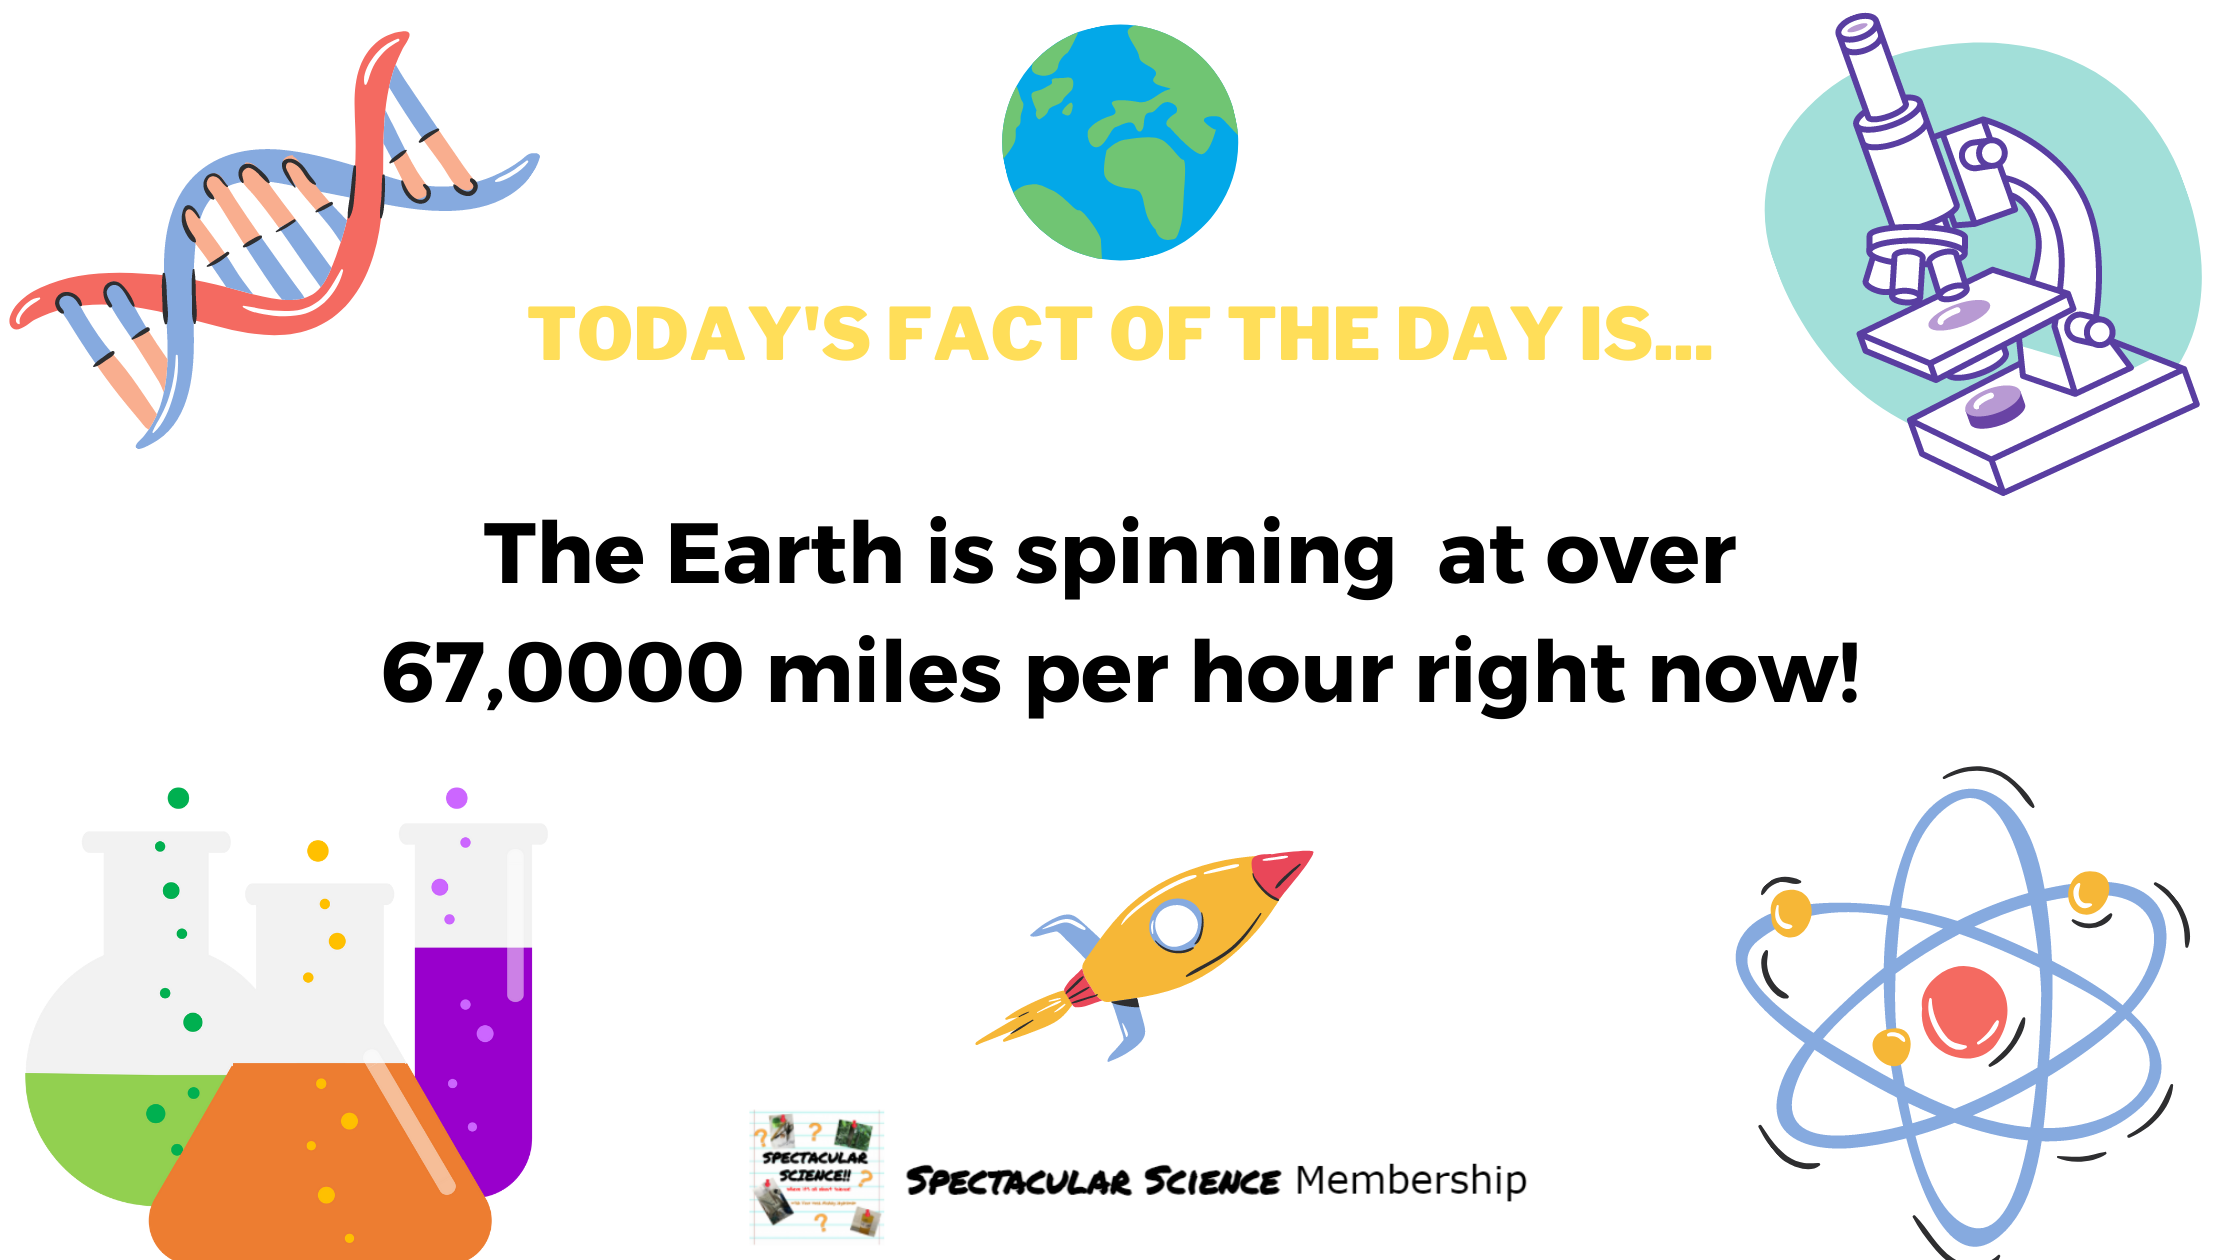 Fact of the Day Image Dec. 24th